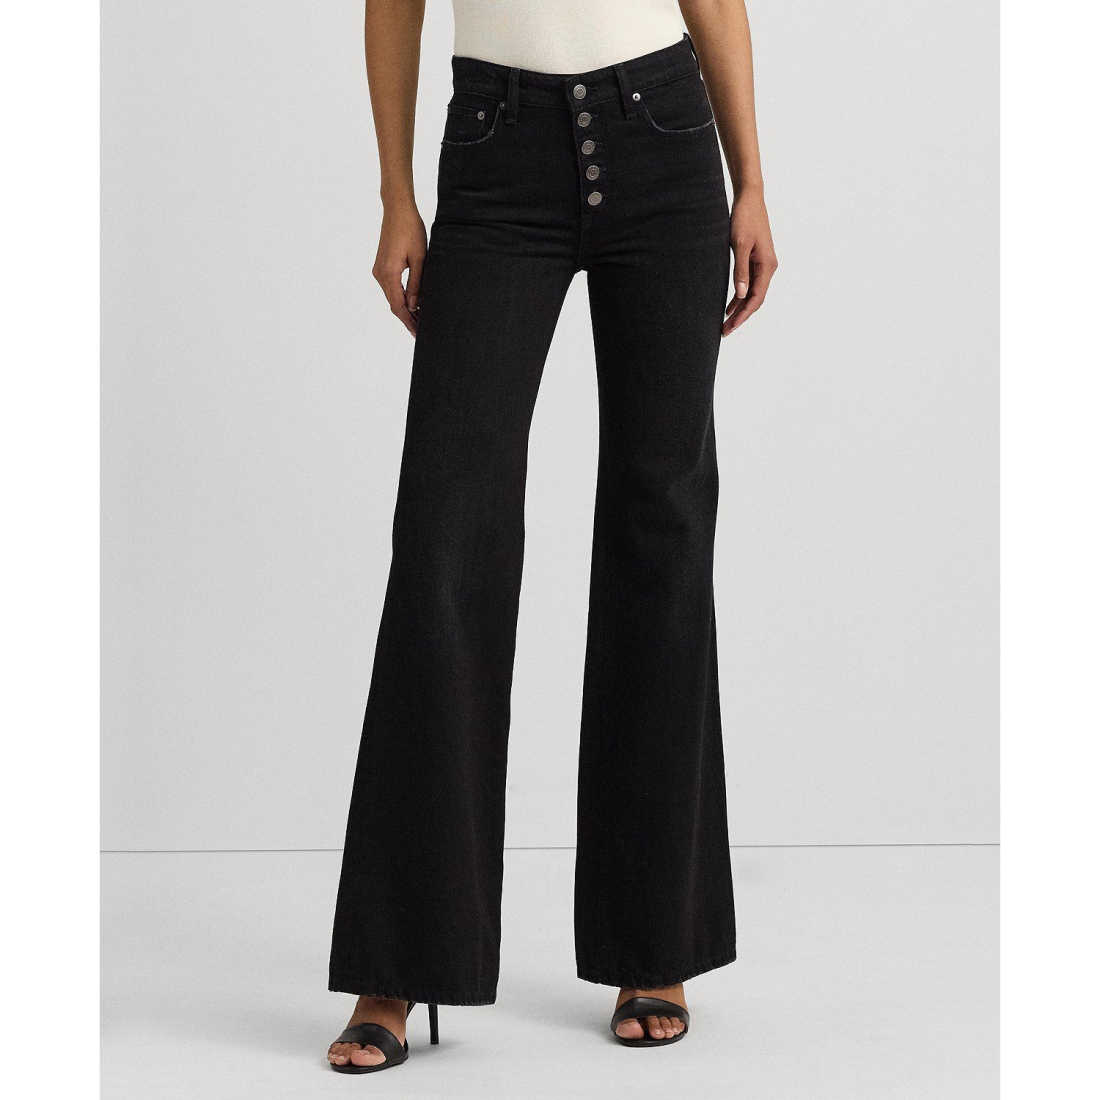 Women's 'High-Rise Flare' Jeans